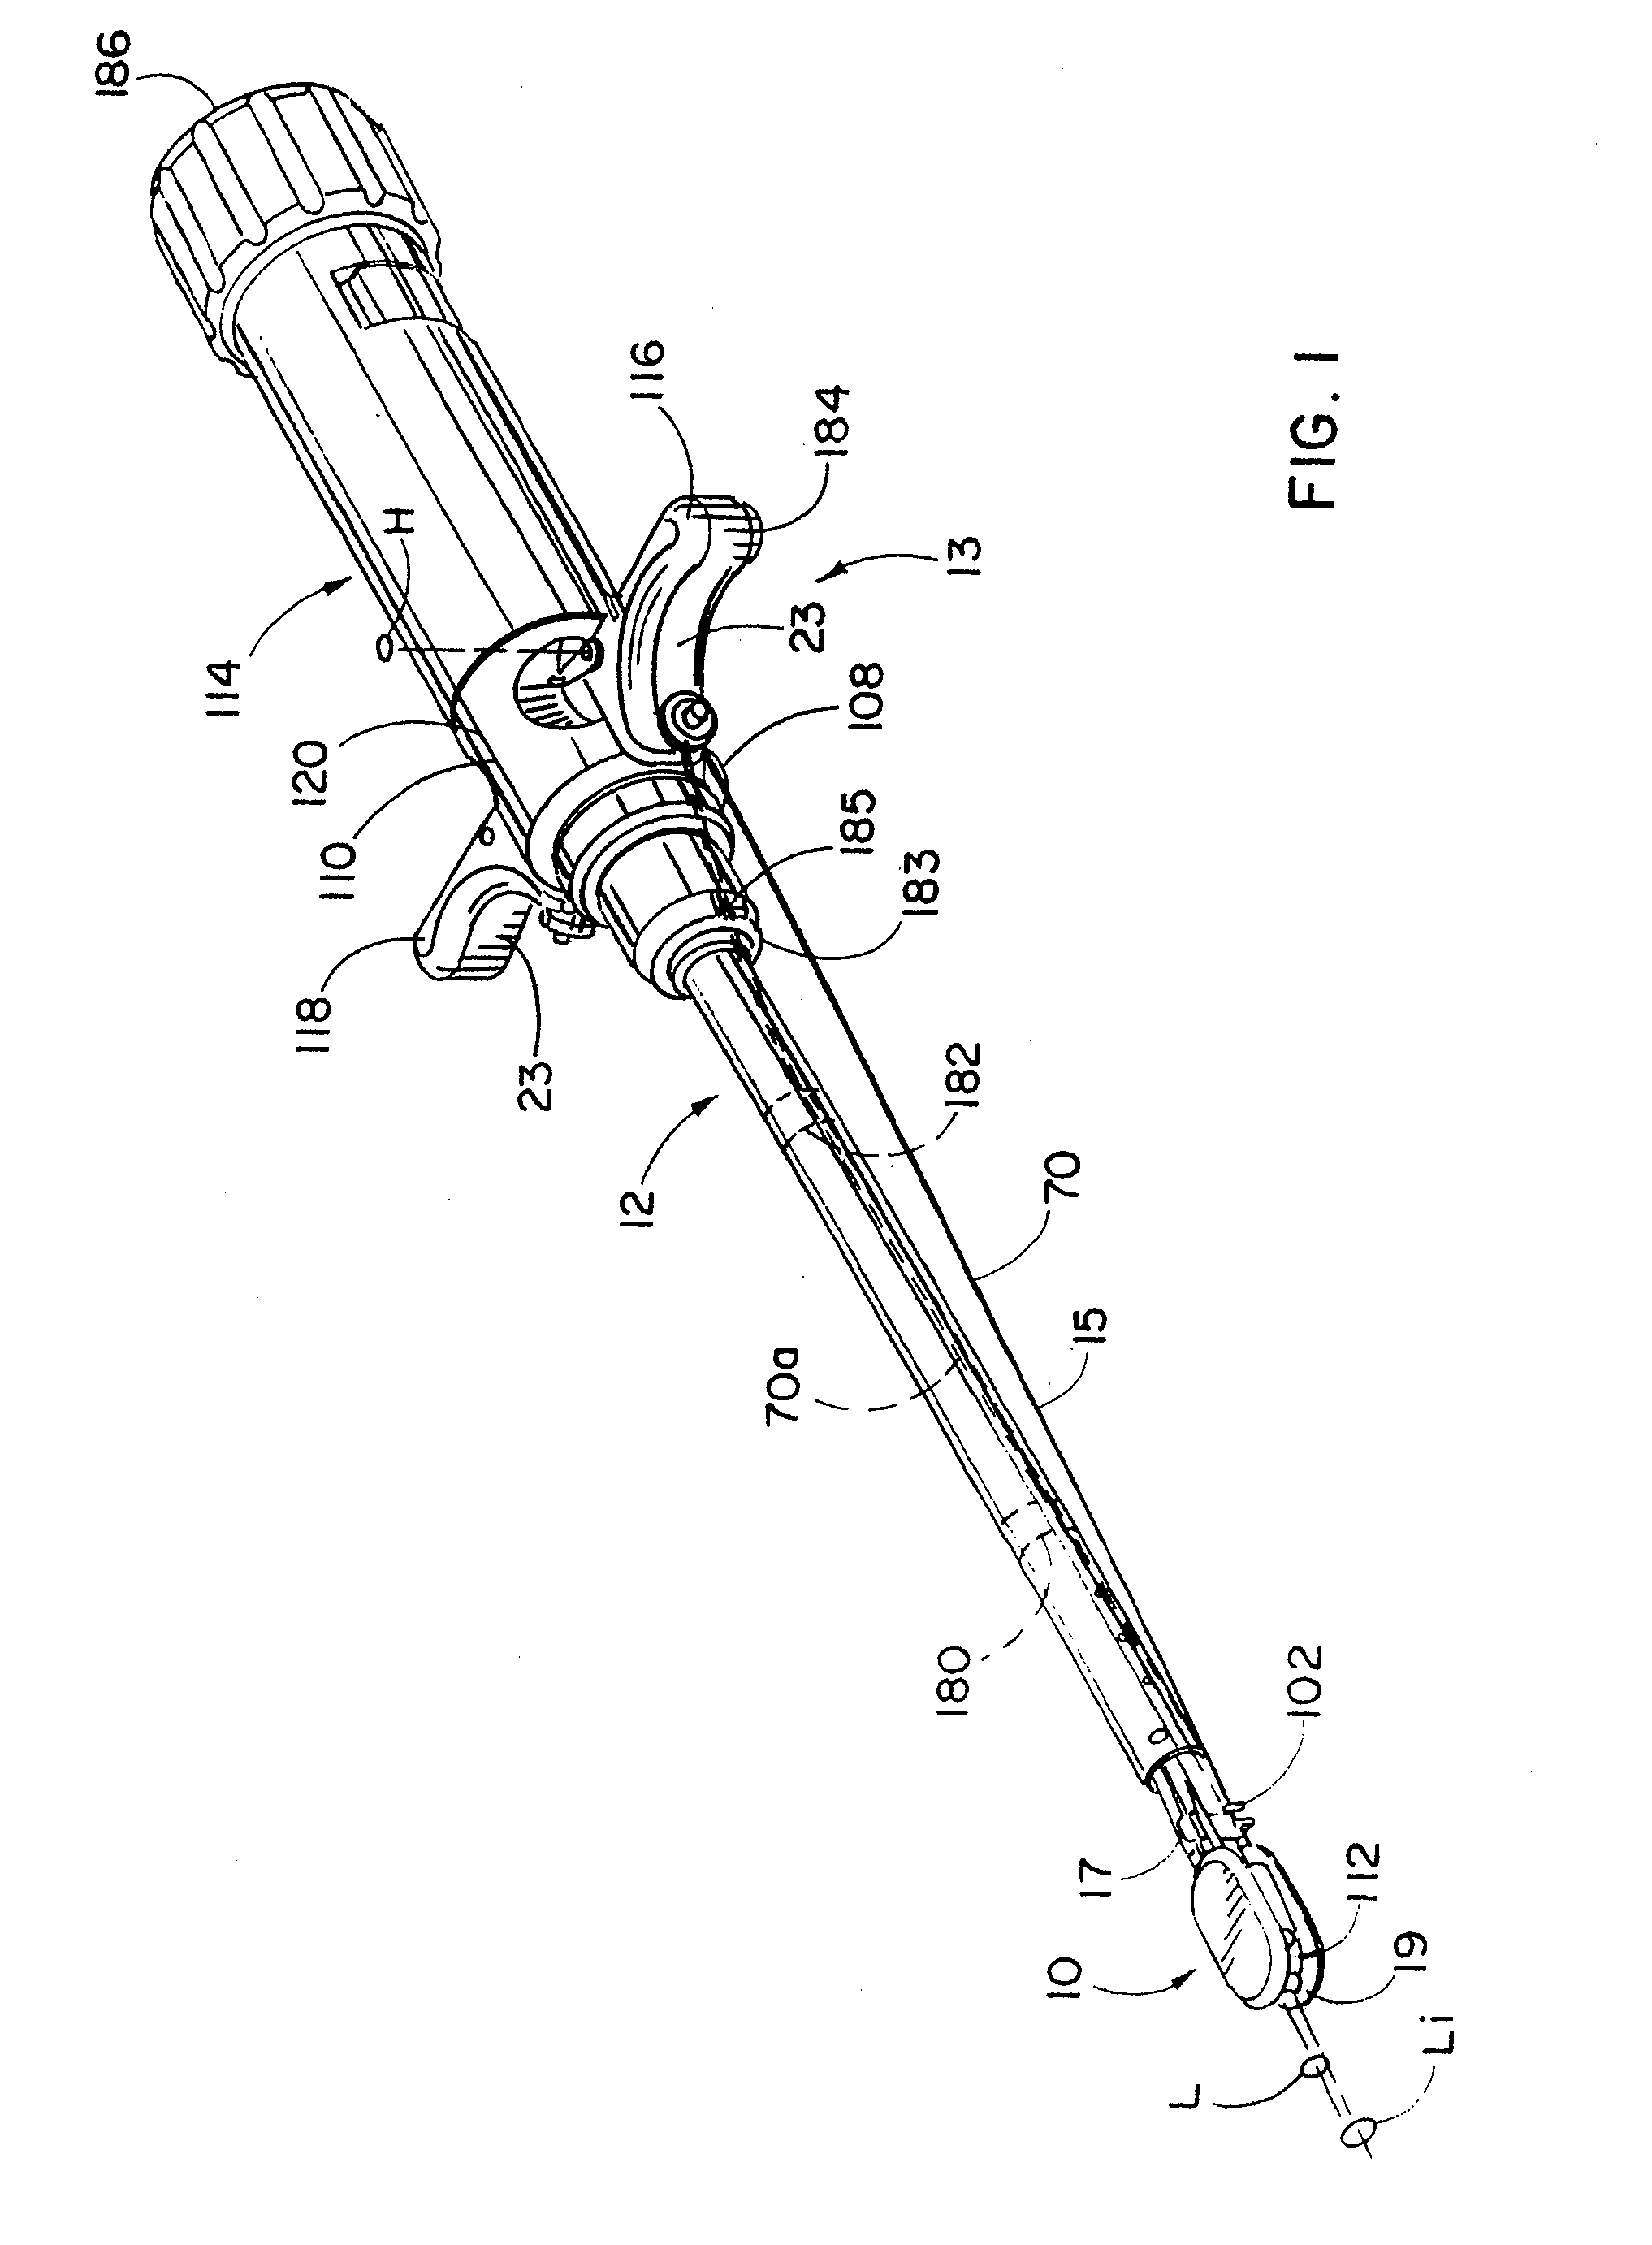 System and Methods for Inserting a Spinal Disc Device Into an Intervertebral Space